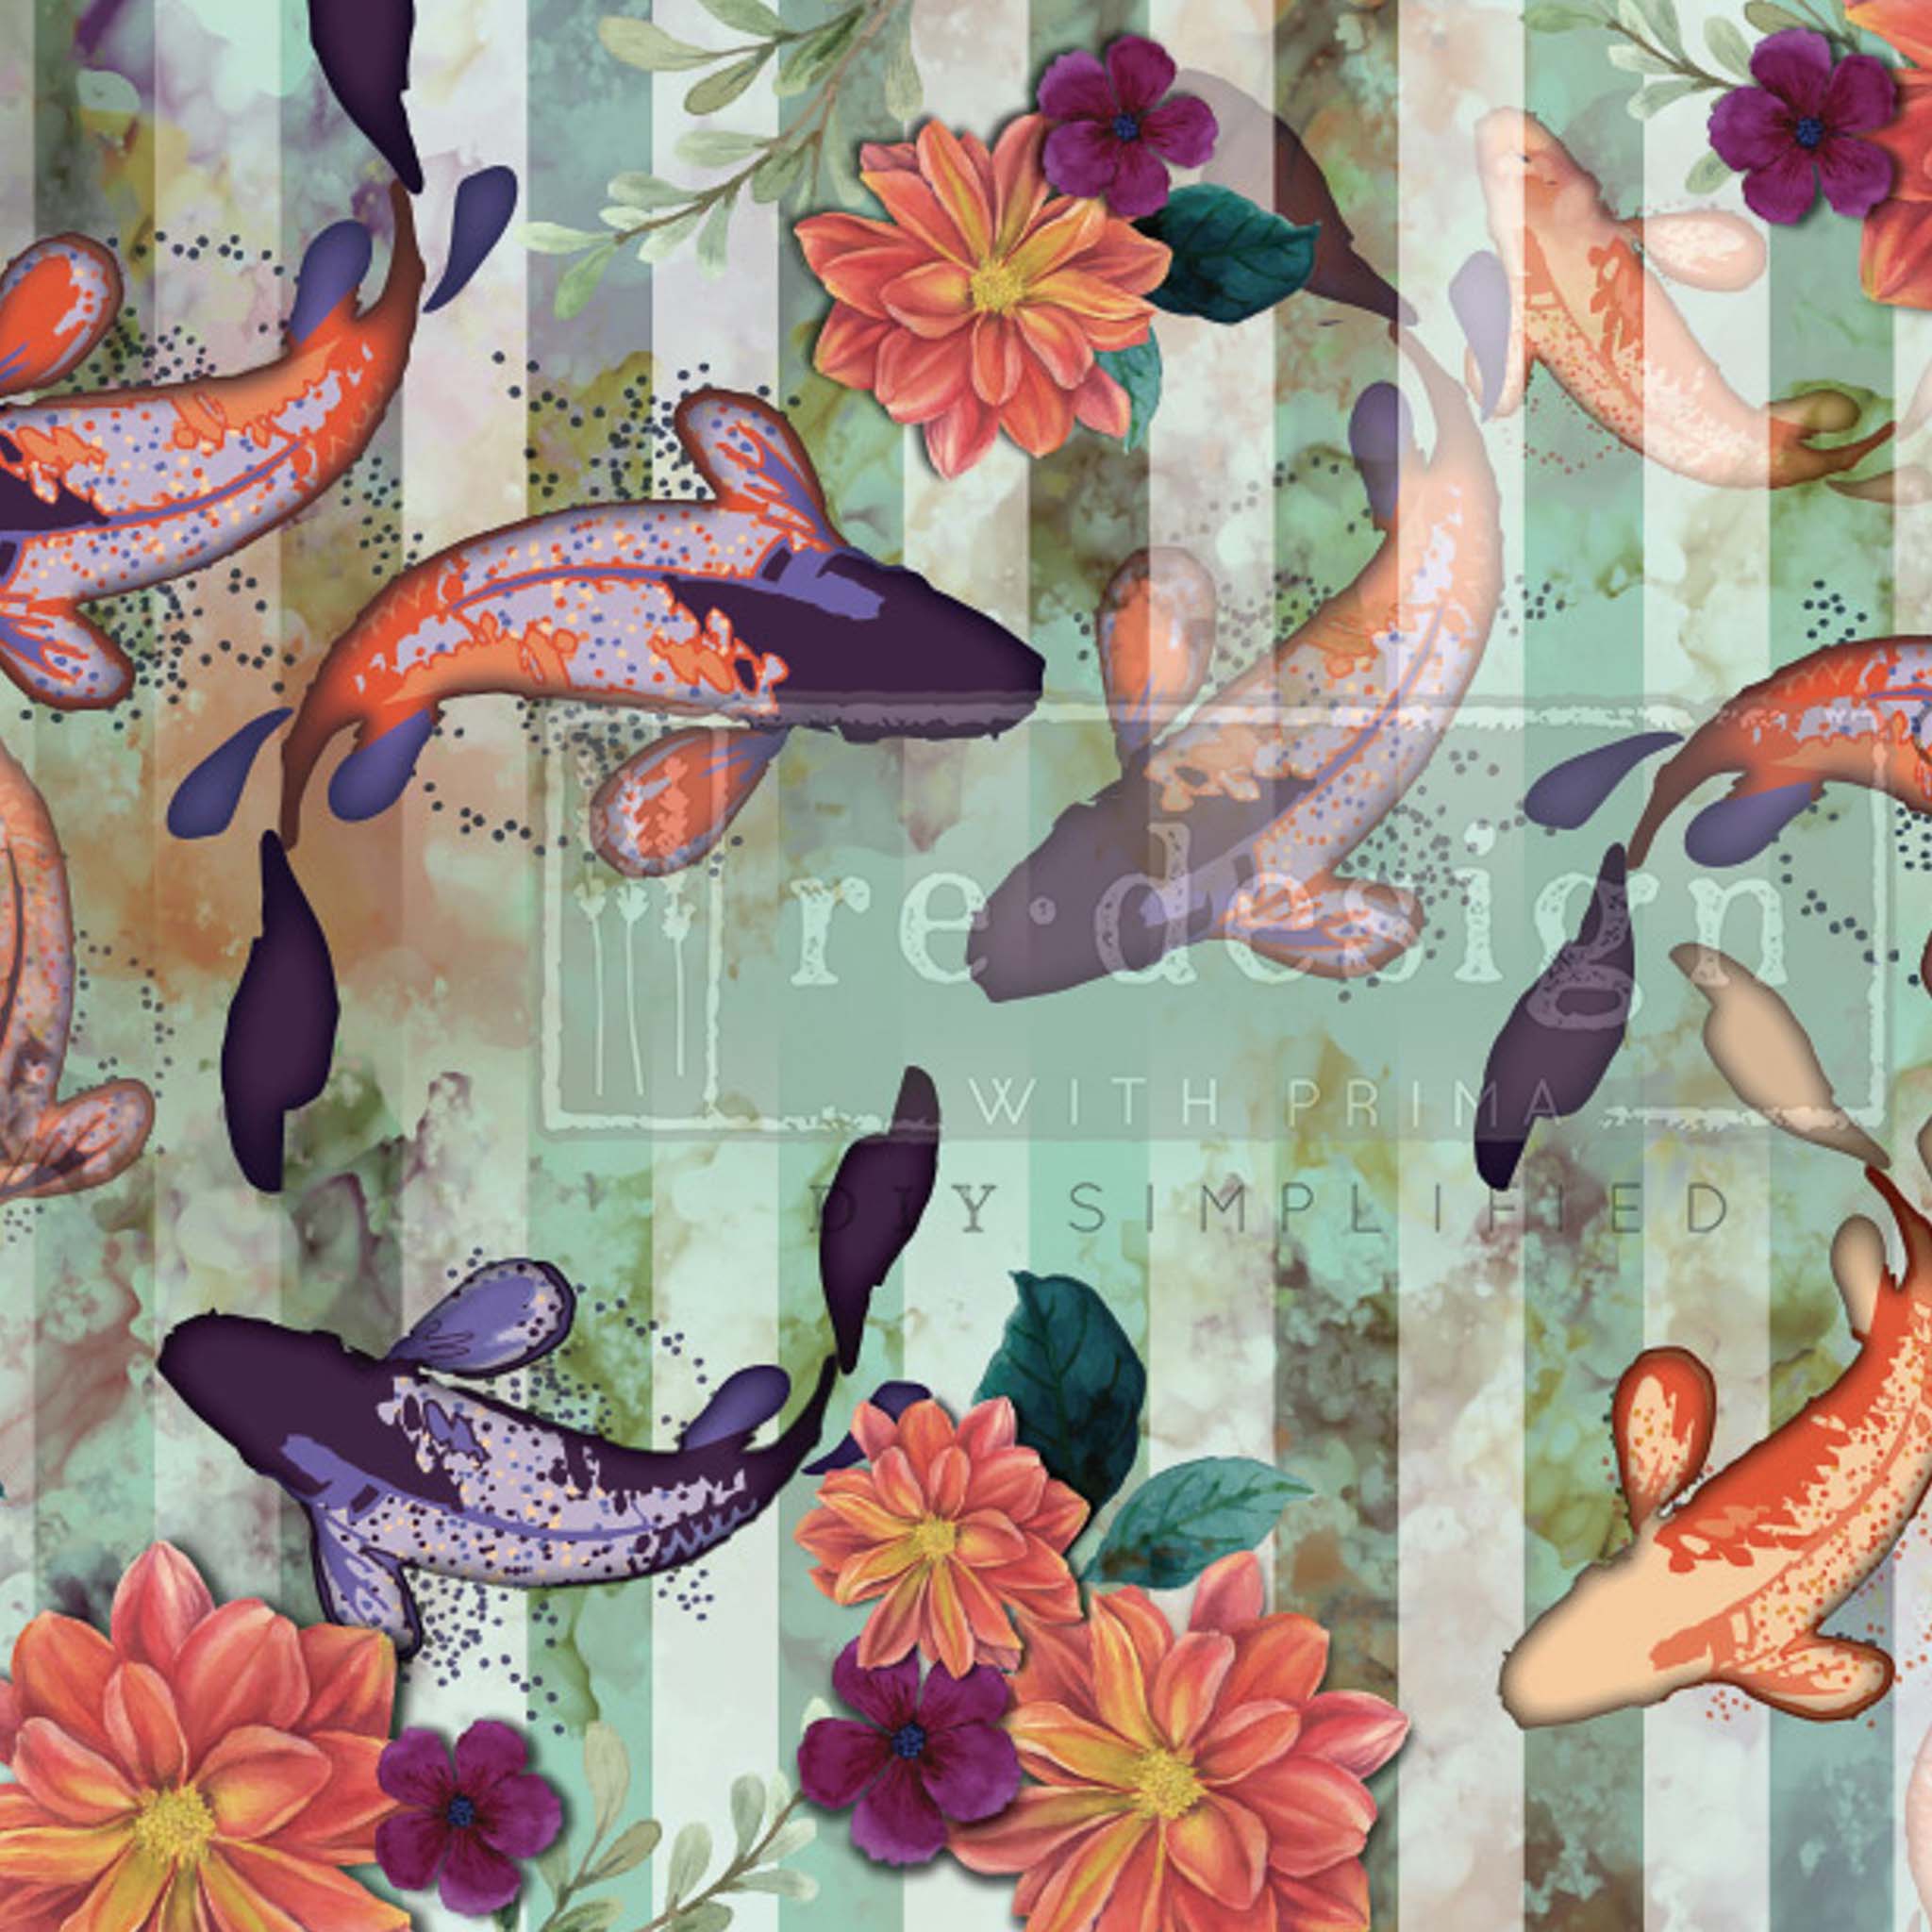 Close-up of a tissue paper design featuring a playful striped background and whimsical images of koi fish swimming among water lilies.